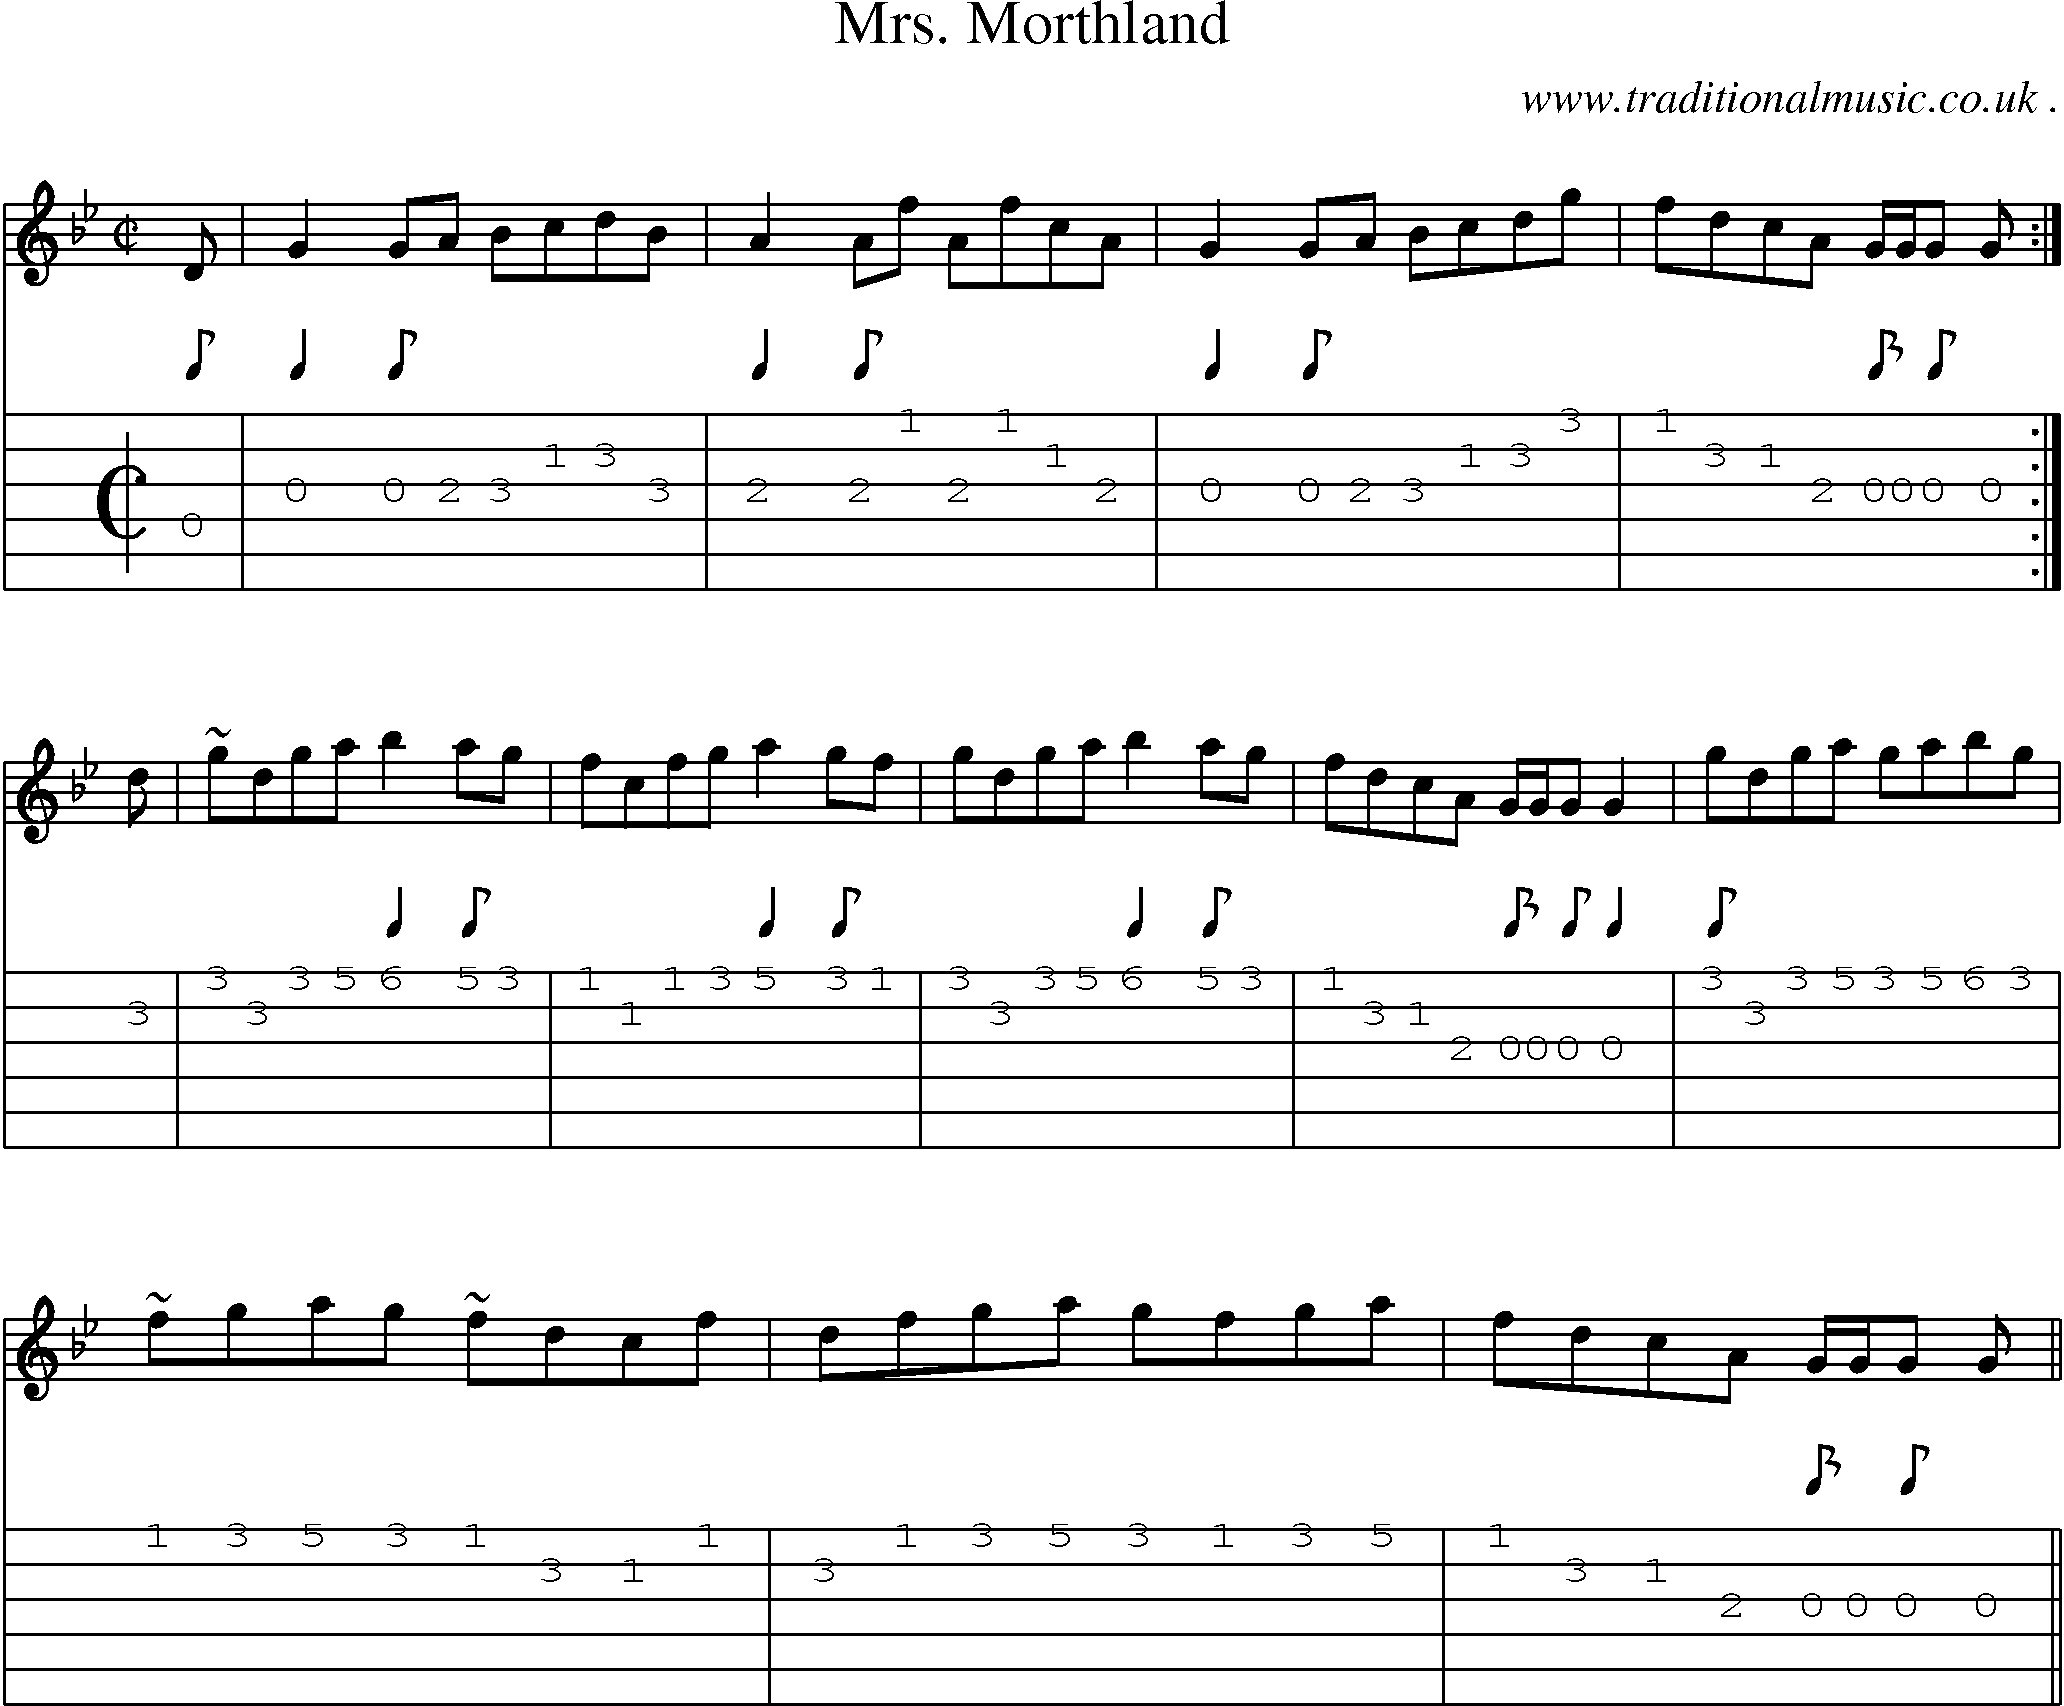 Sheet-music  score, Chords and Guitar Tabs for Mrs Morthland